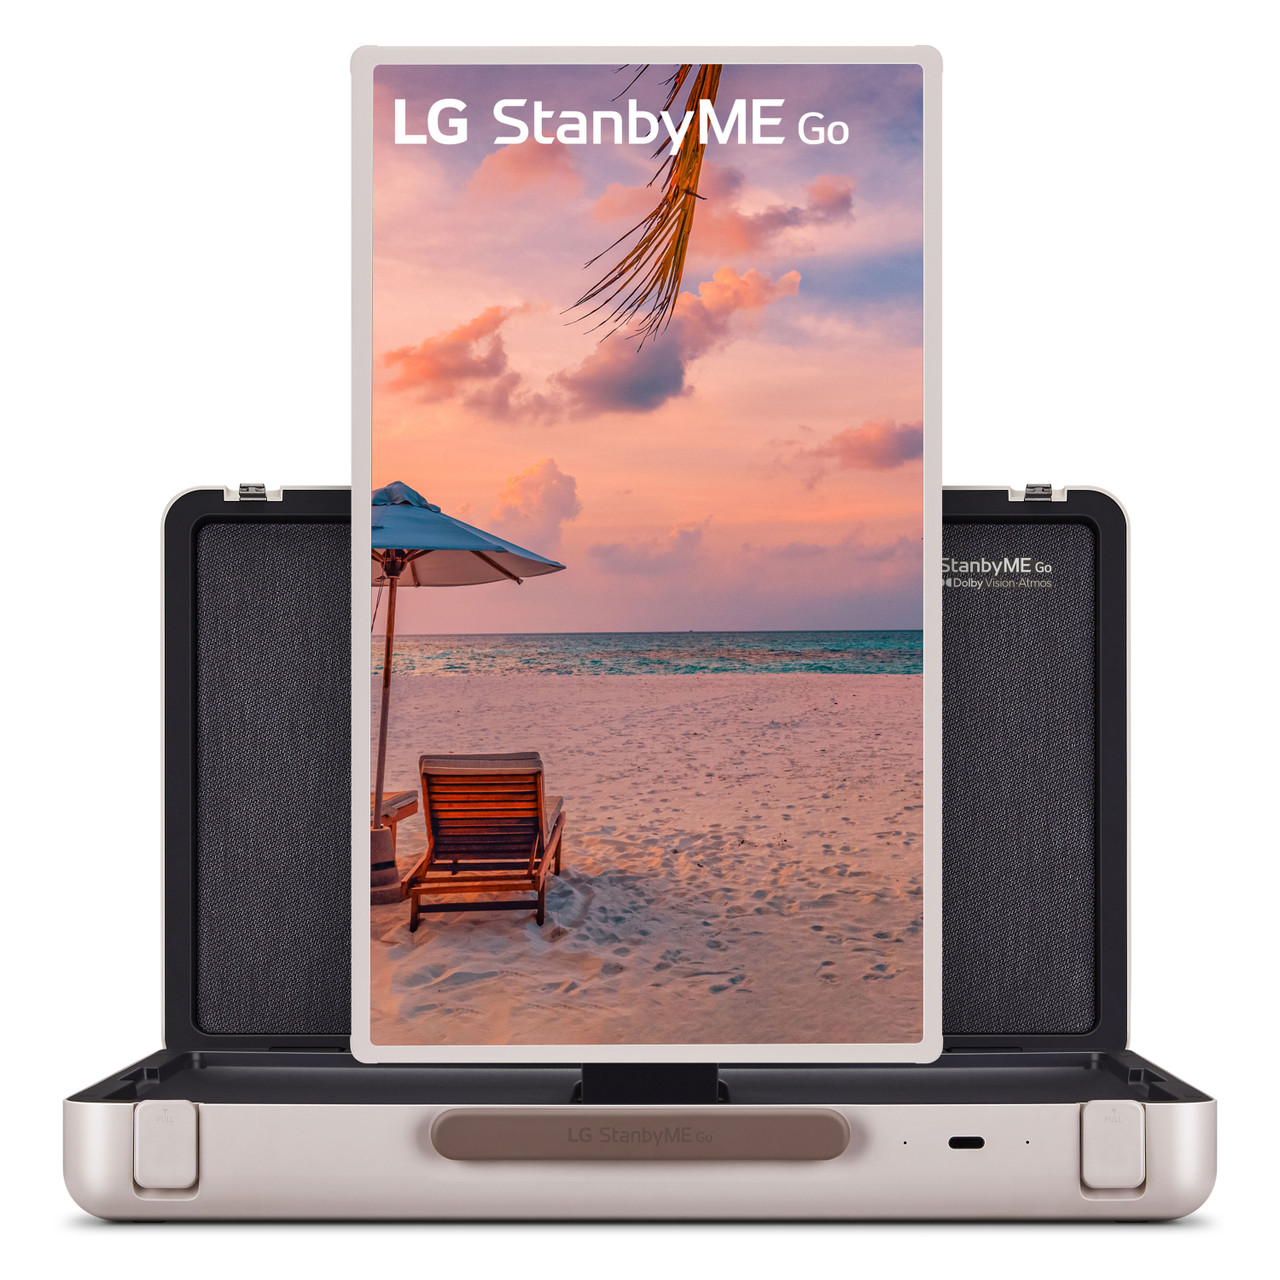 LG StanbyME Rollable Wireless Smart Touch Screen HDR LED webOS